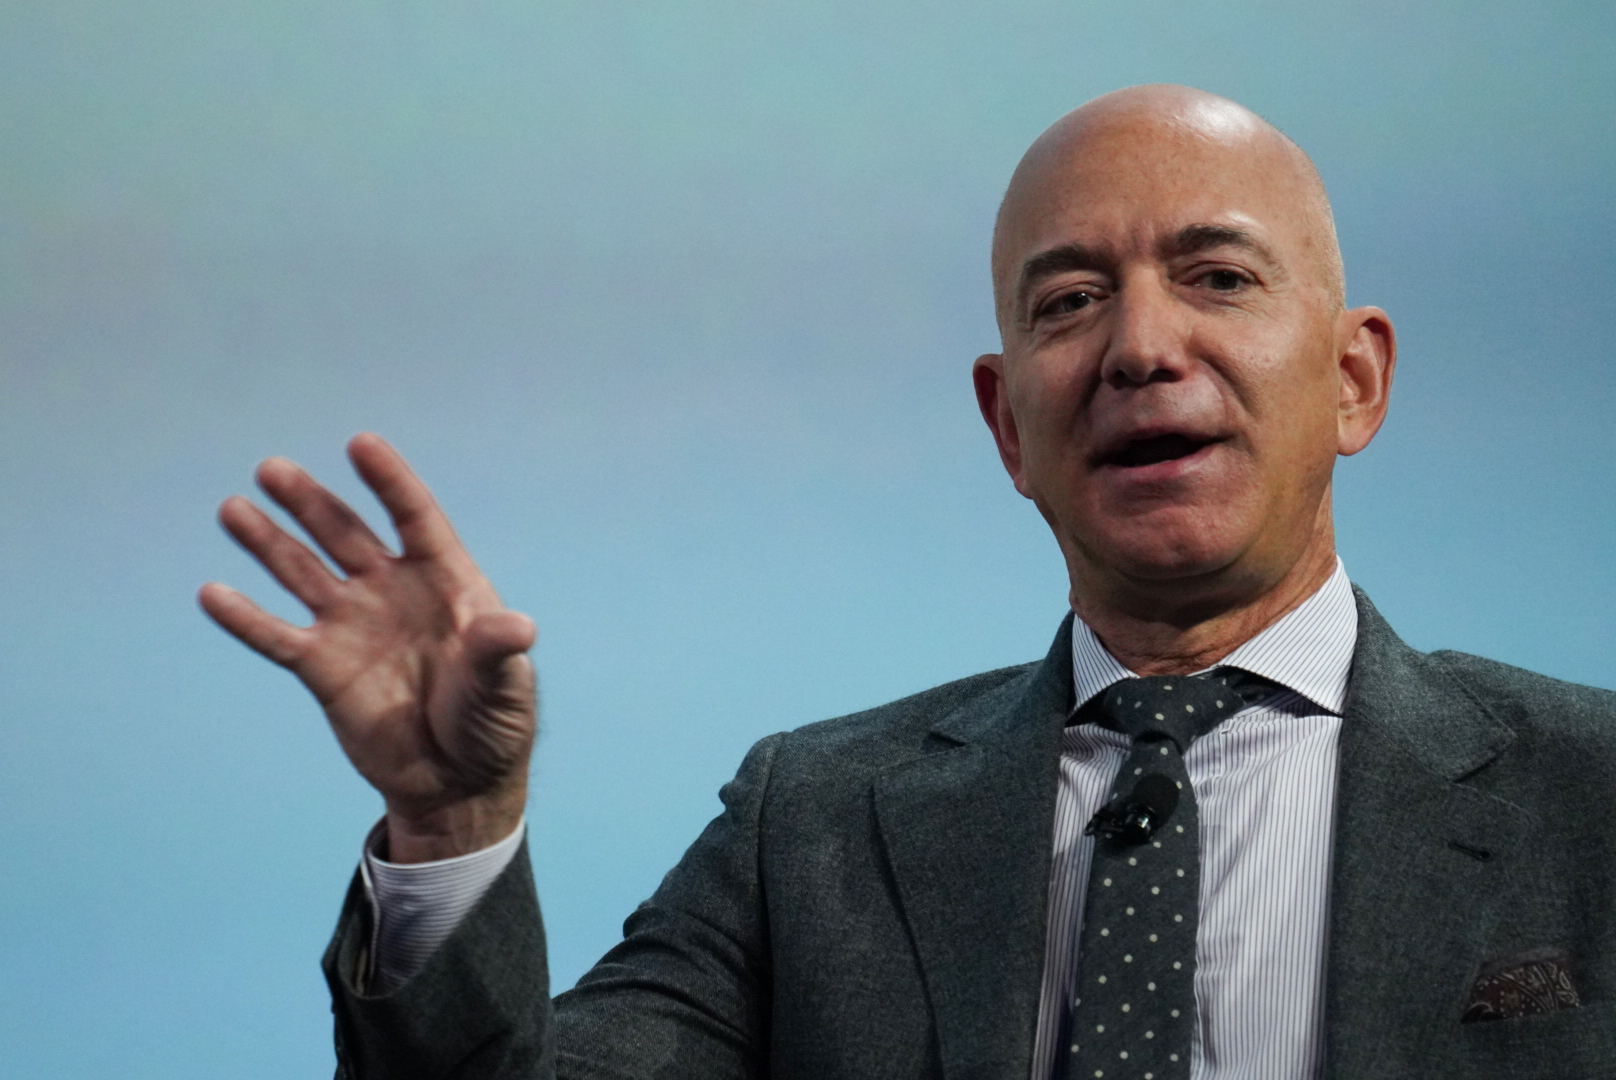 Bezos stepping down as CEO of Amazon